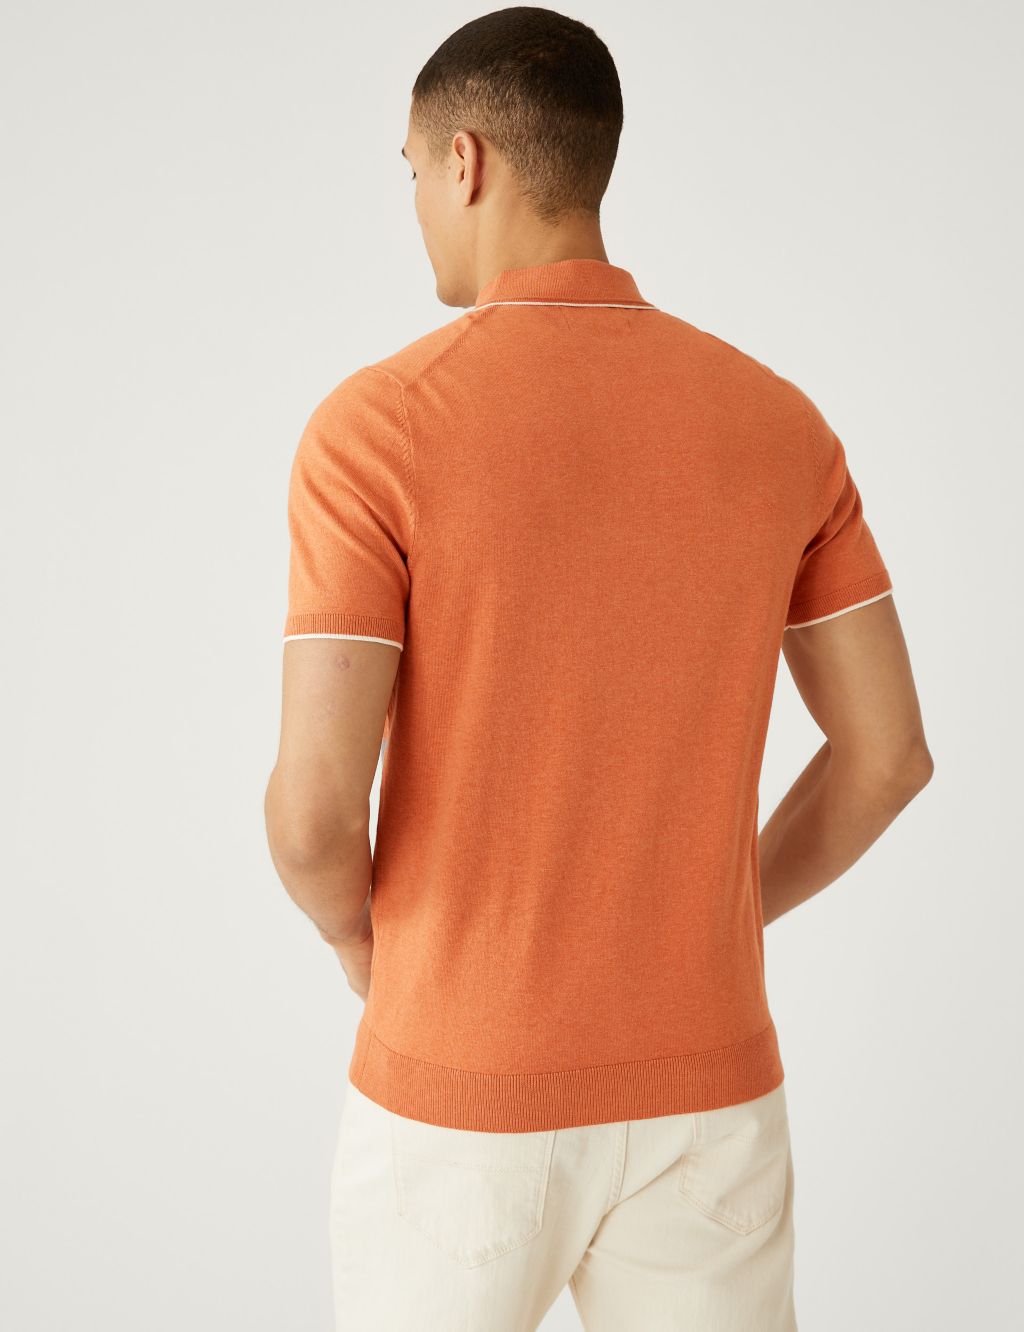 Cotton Rich Short Sleeve Knitted Polo Shirt image 3